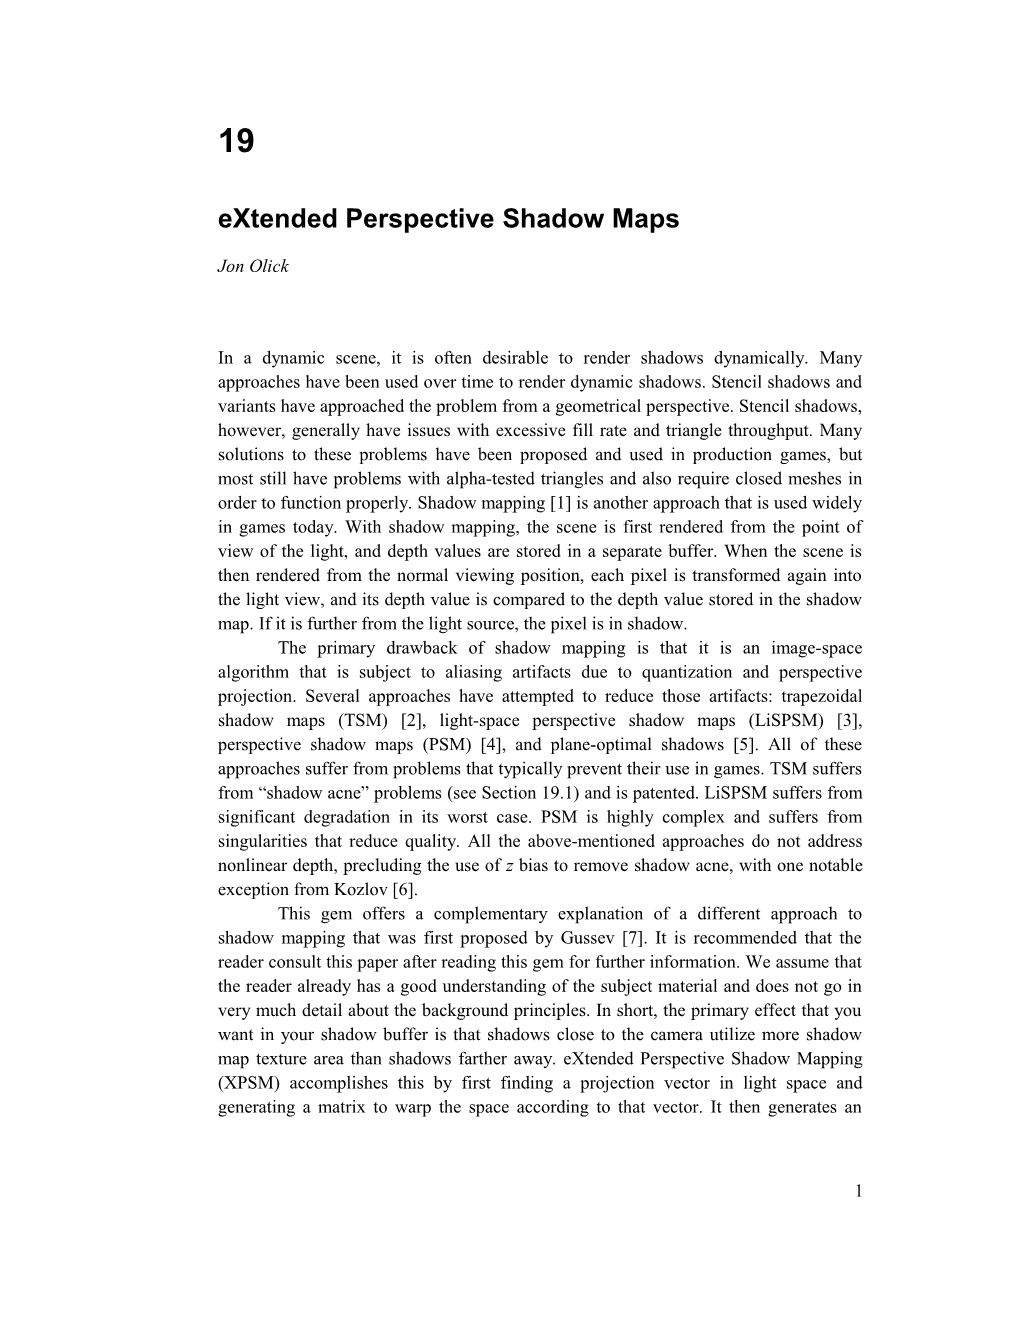 Extended Perspective Shadow Maps